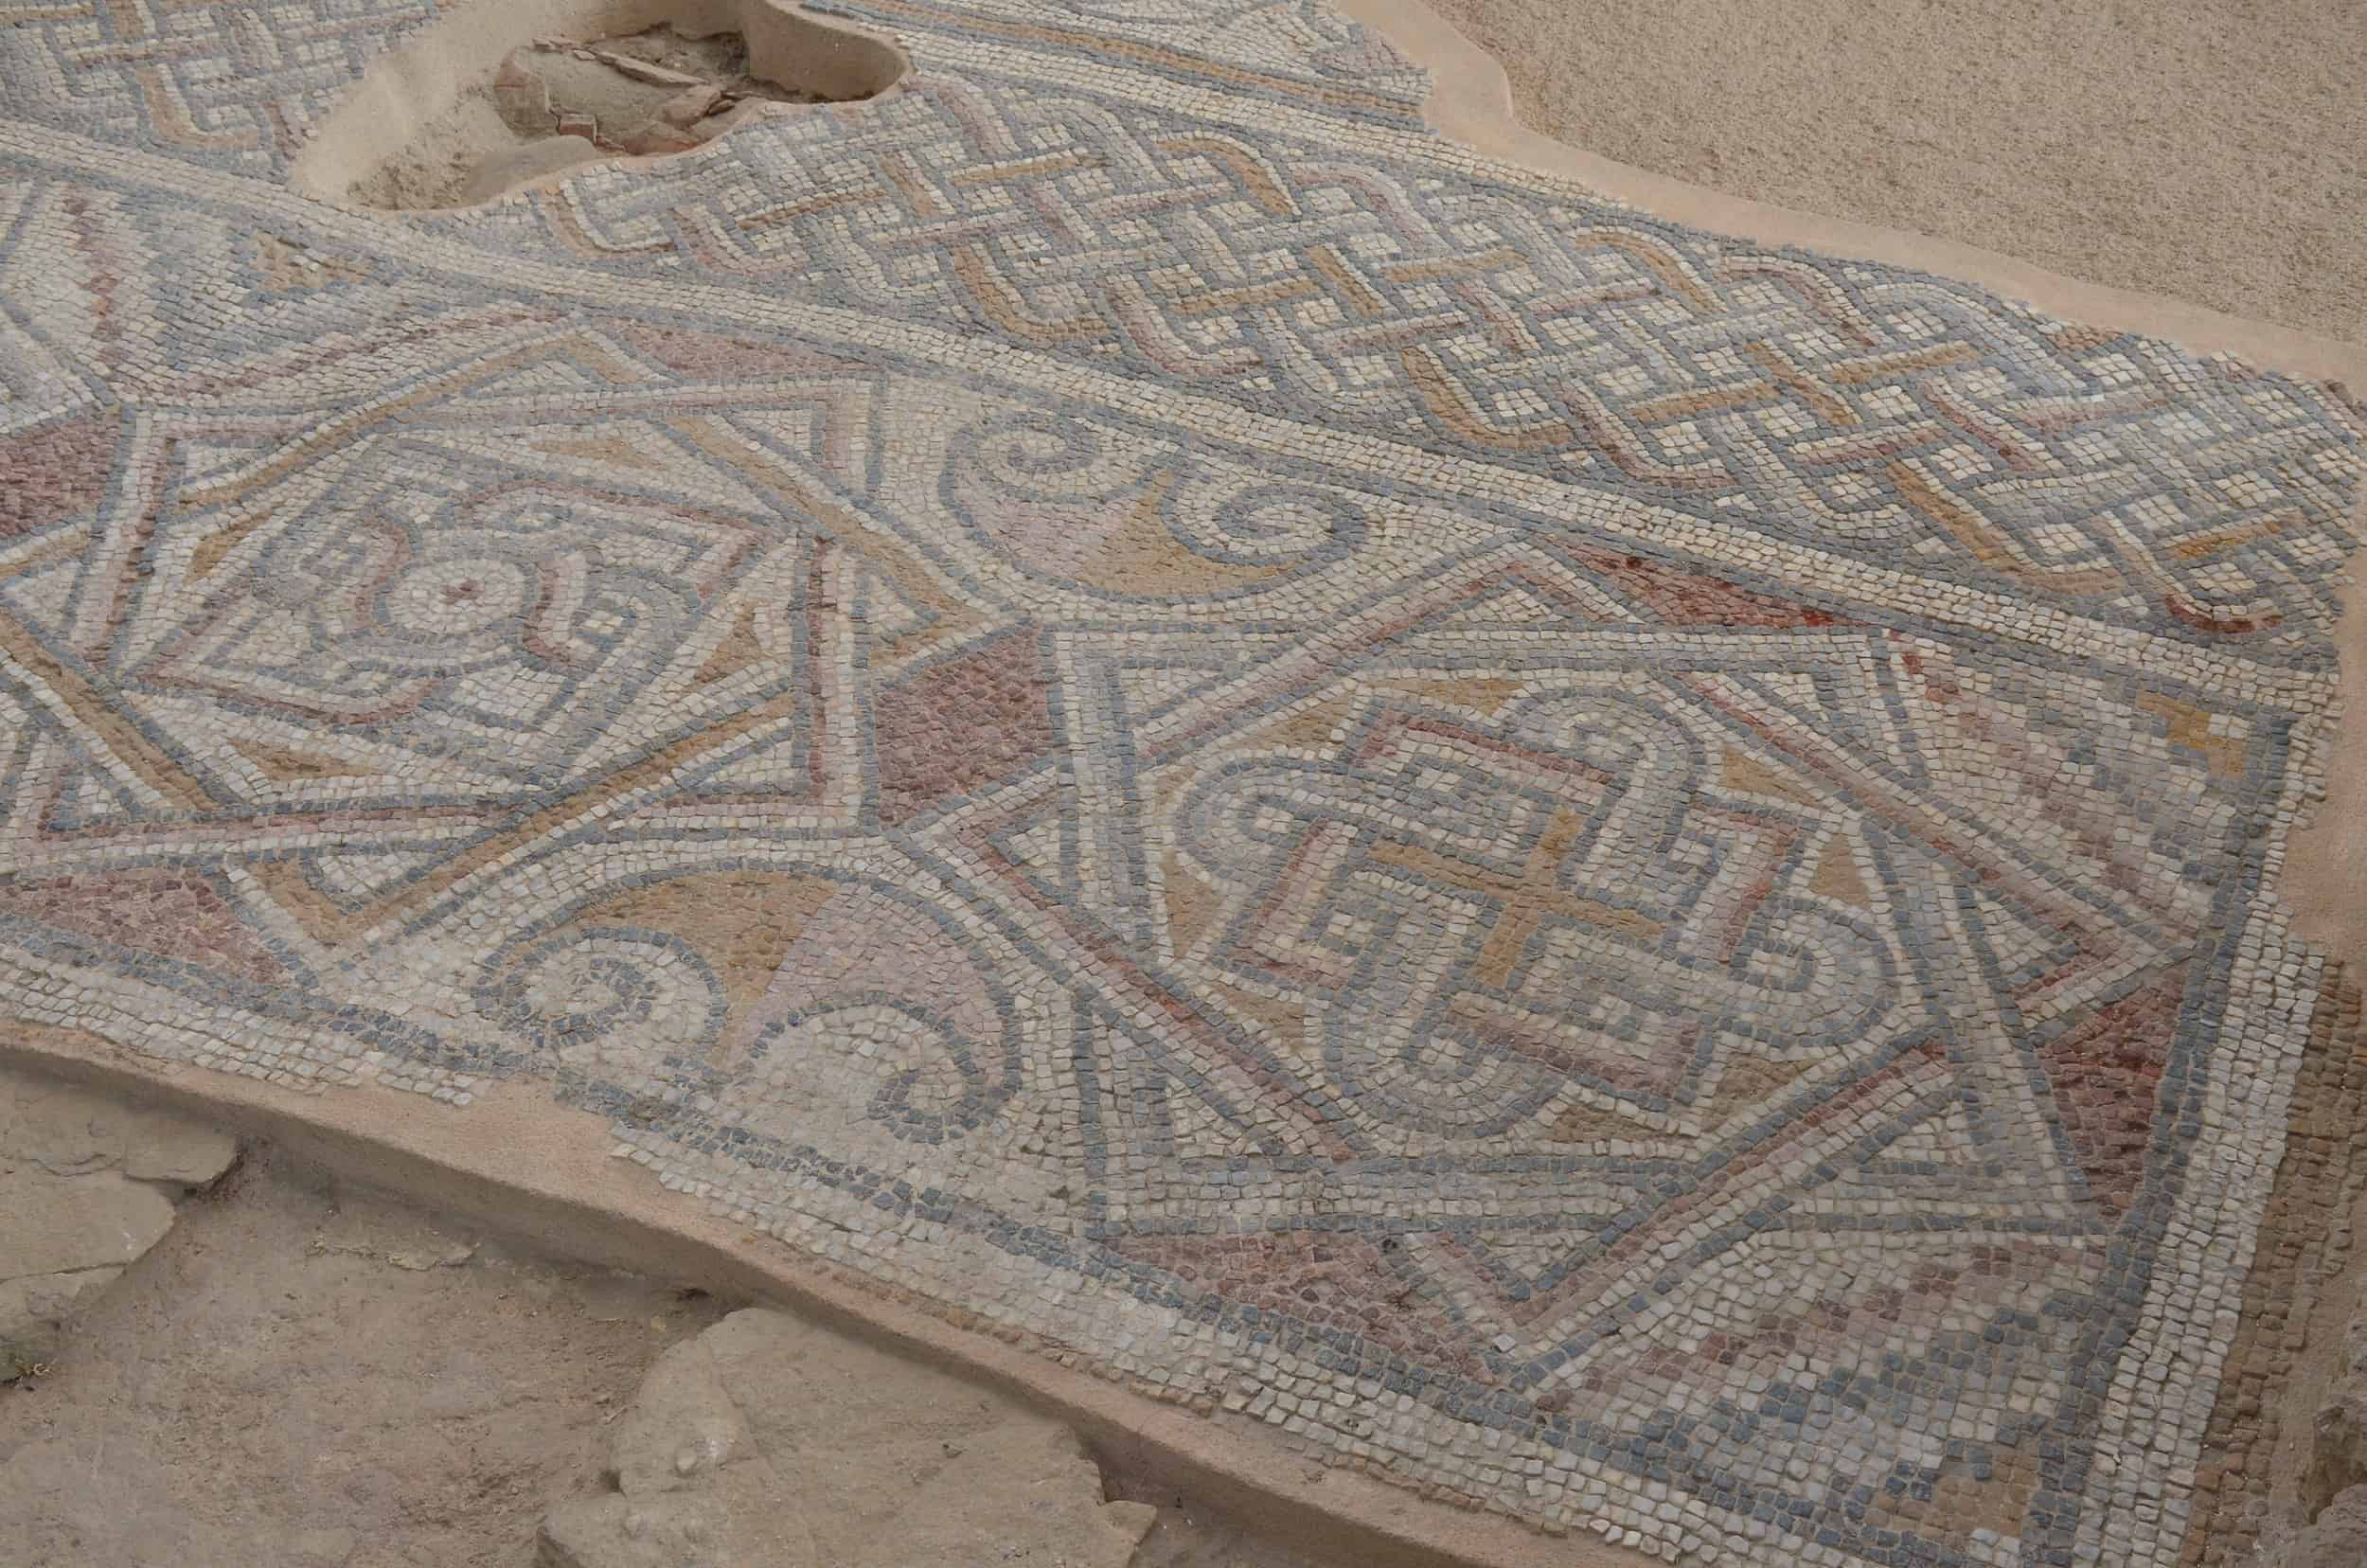 Mosaic floor of the north aisle at the Church of Laodicea